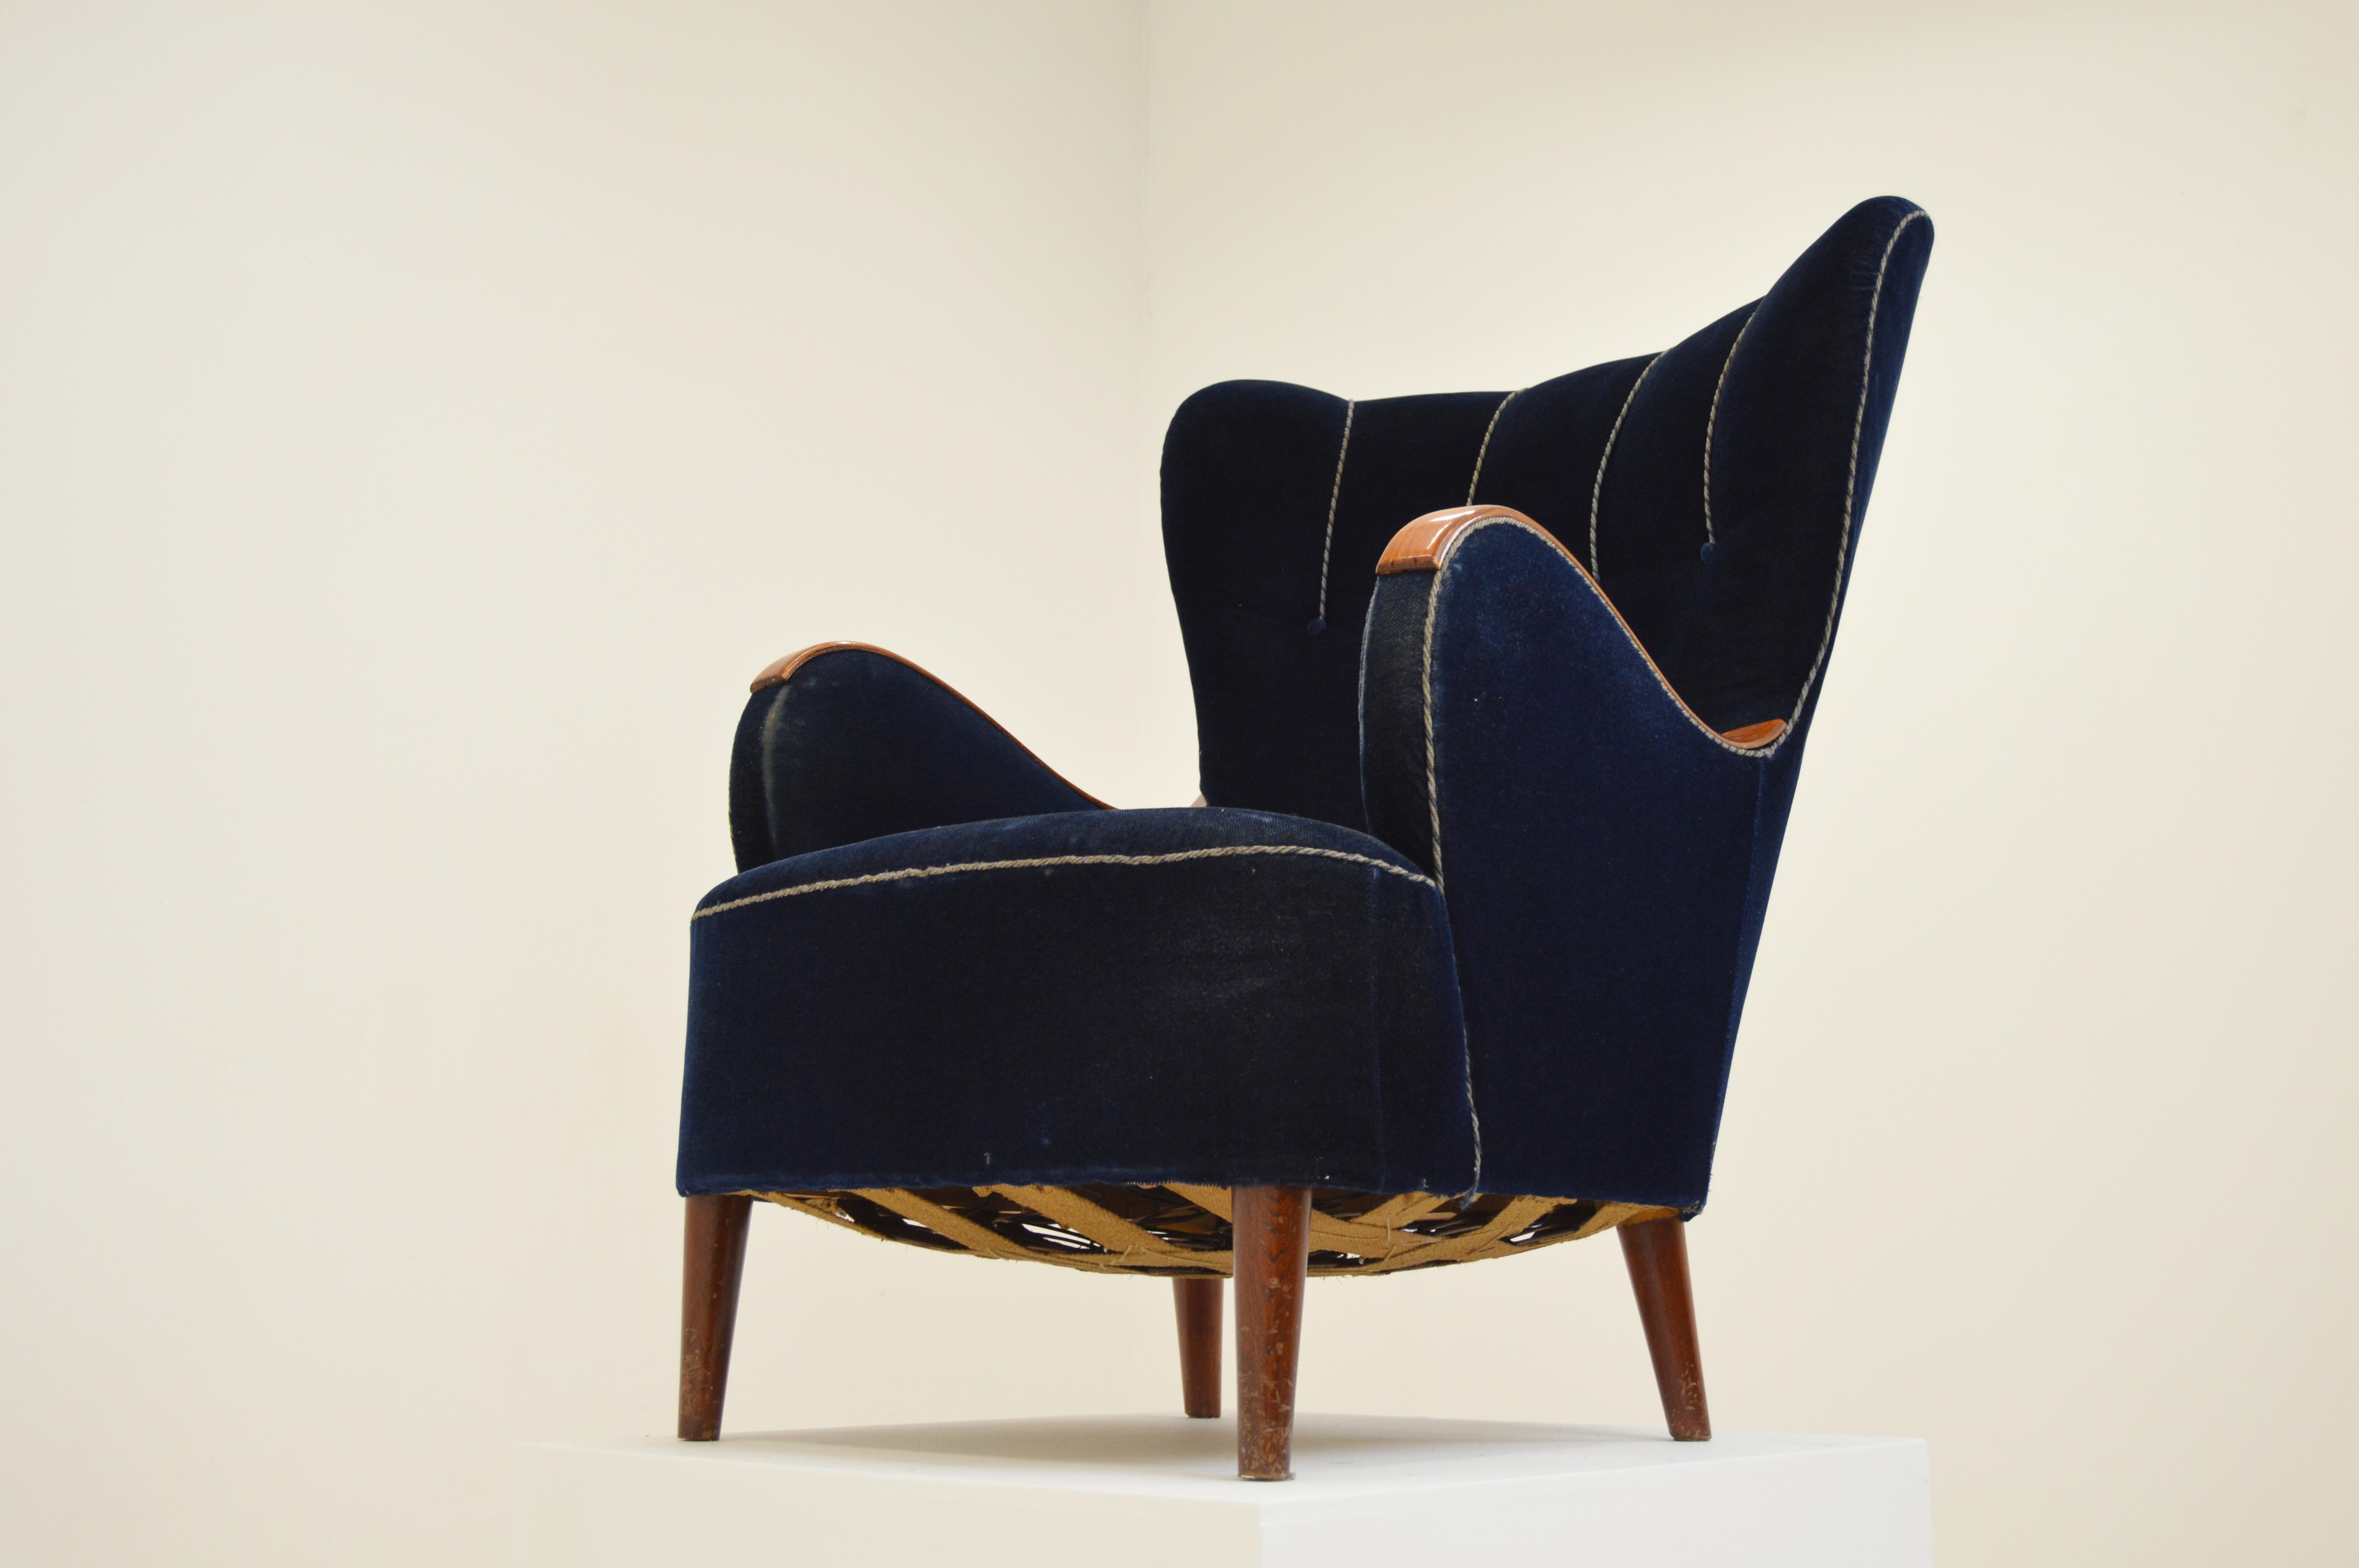 In the style of Mogens Lassen, Fritz Henningsen. Scandinavian design, unknown better manufacturer in Sweden or Denmark.

Imagine this elegant armchair in sheepskin or a high quality fabric with your favorite pattern. It has its original fabric